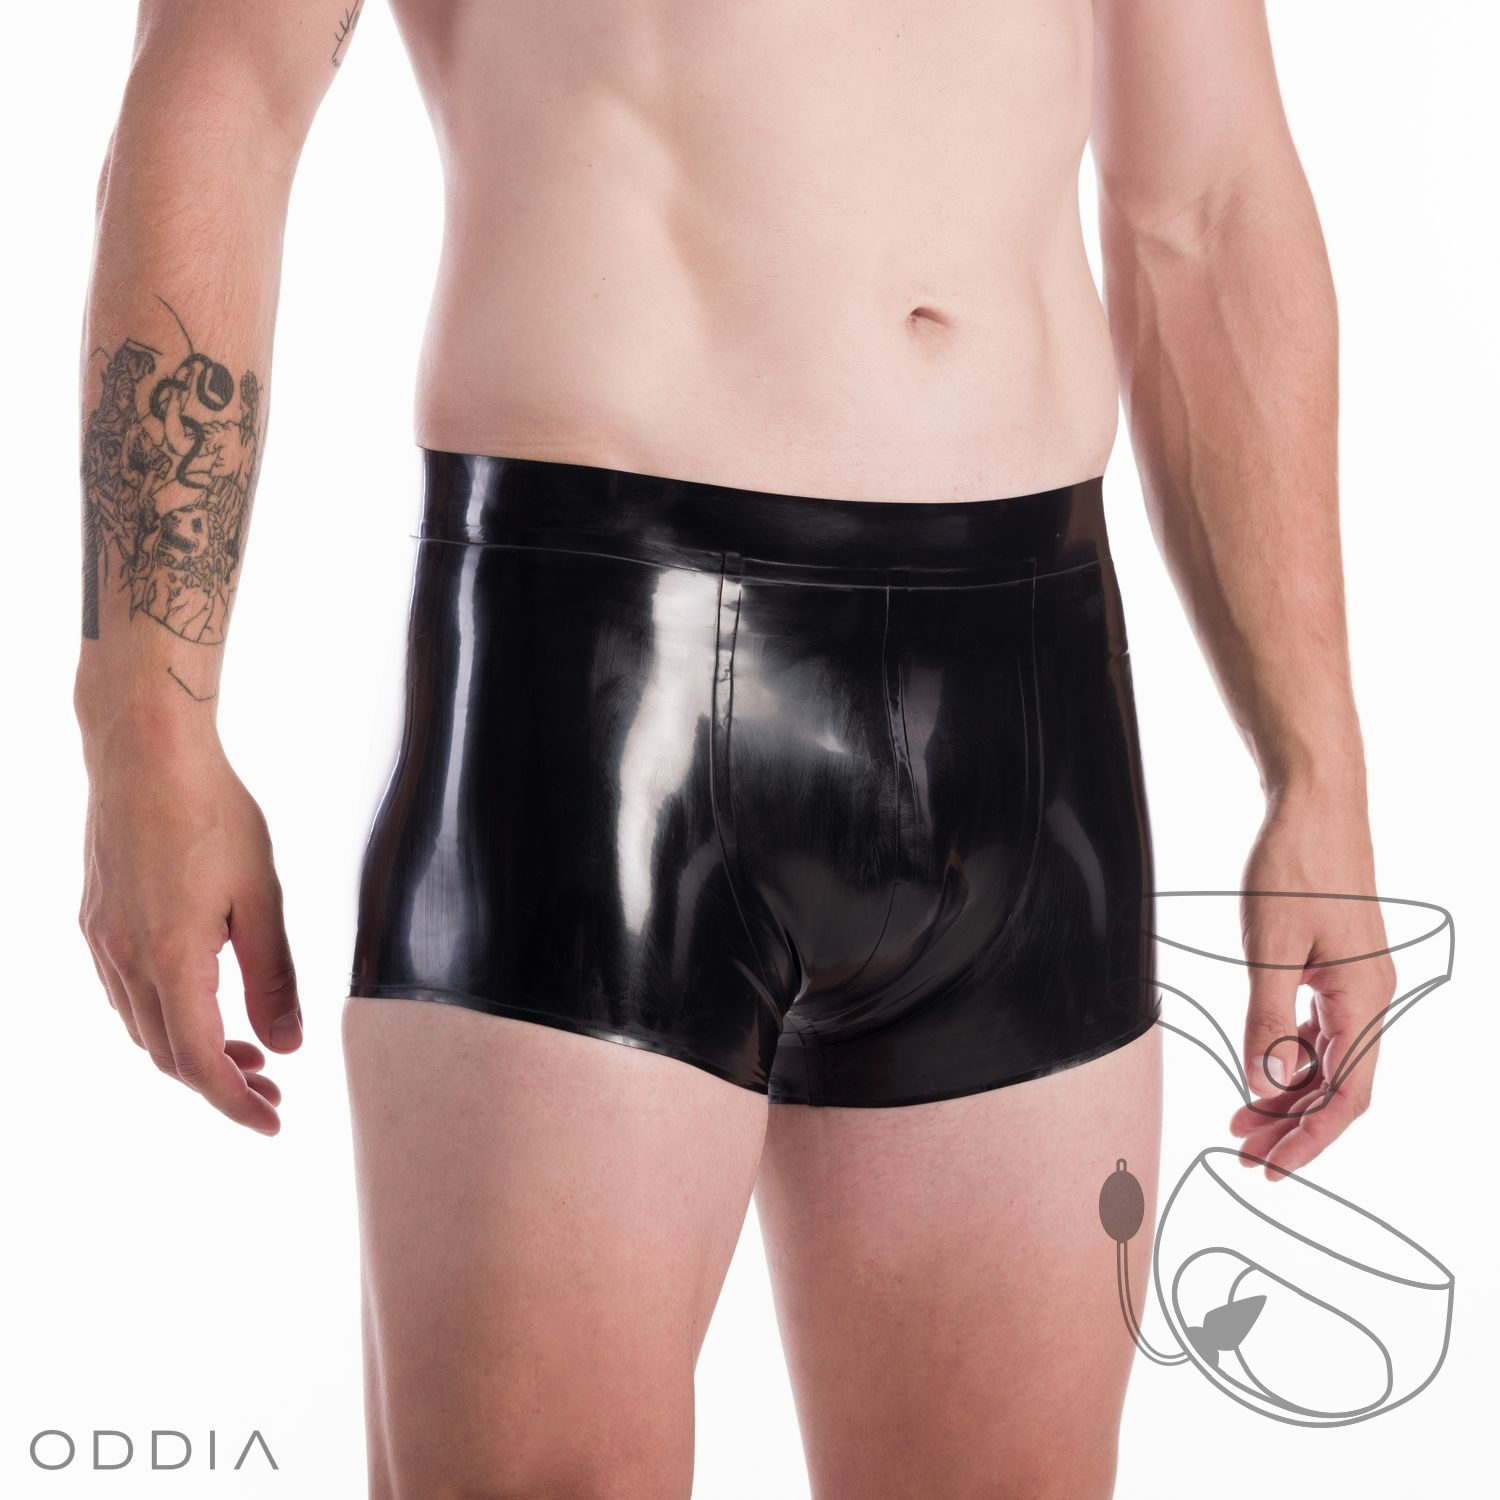 Men's latex trunks with attached inflatable anal dildo